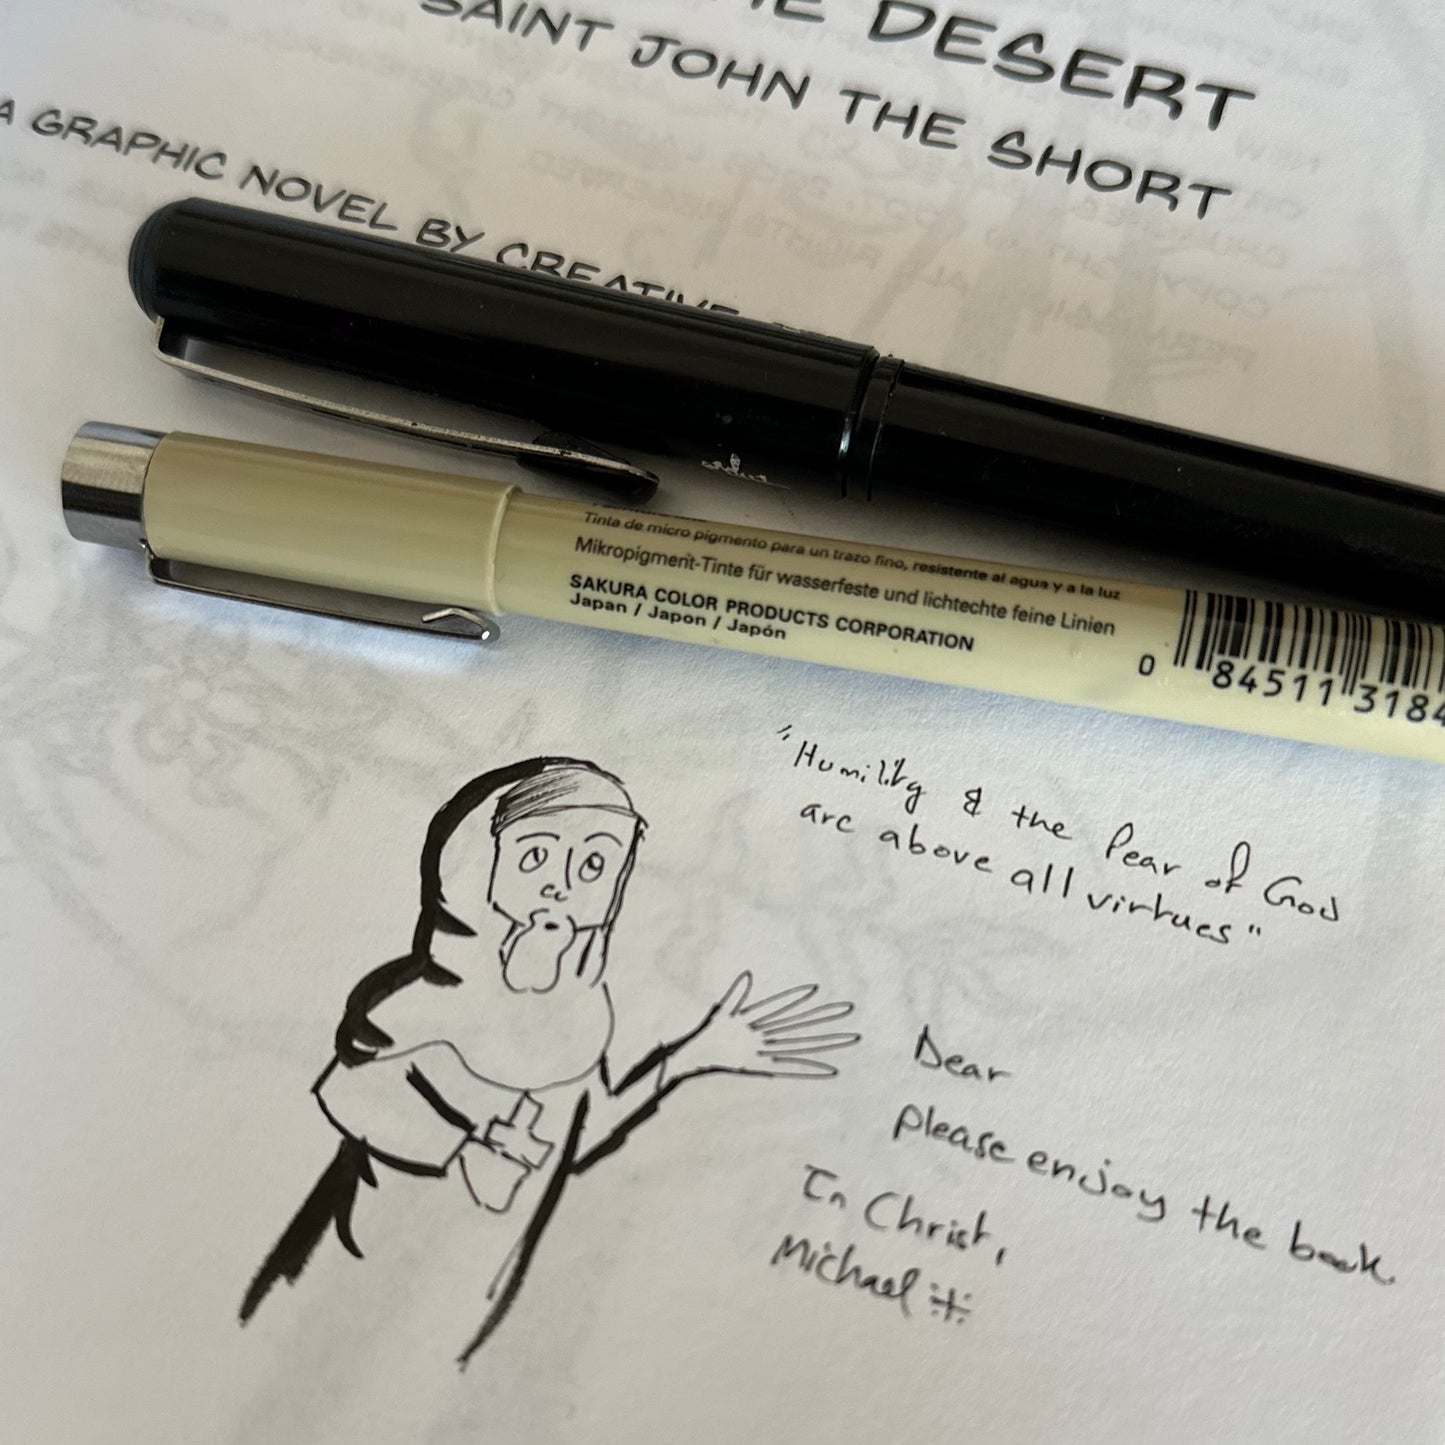 A Forest In the Desert: the life of saint John the Short